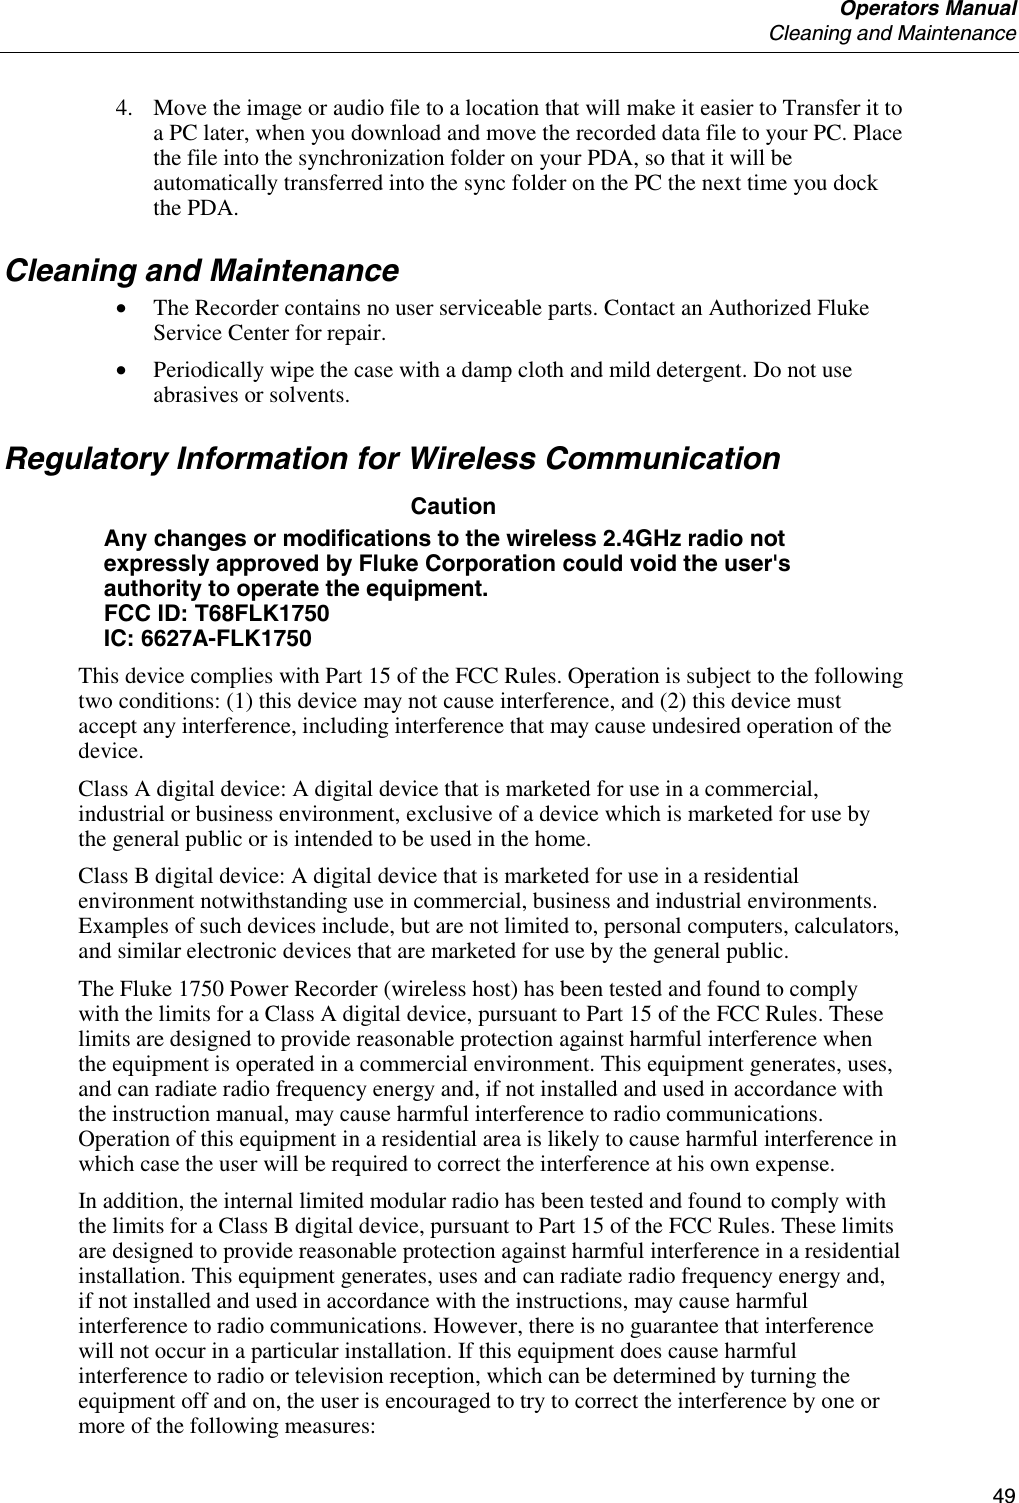  Operators Manual  Cleaning and Maintenance     49 4. Move the image or audio file to a location that will make it easier to Transfer it to a PC later, when you download and move the recorded data file to your PC. Place the file into the synchronization folder on your PDA, so that it will be automatically transferred into the sync folder on the PC the next time you dock the PDA. Cleaning and Maintenance • The Recorder contains no user serviceable parts. Contact an Authorized Fluke Service Center for repair. • Periodically wipe the case with a damp cloth and mild detergent. Do not use abrasives or solvents. Regulatory Information for Wireless Communication Caution  Any changes or modifications to the wireless 2.4GHz radio not expressly approved by Fluke Corporation could void the user&apos;s authority to operate the equipment. FCC ID: T68FLK1750 IC: 6627A-FLK1750 This device complies with Part 15 of the FCC Rules. Operation is subject to the following two conditions: (1) this device may not cause interference, and (2) this device must accept any interference, including interference that may cause undesired operation of the device. Class A digital device: A digital device that is marketed for use in a commercial, industrial or business environment, exclusive of a device which is marketed for use by the general public or is intended to be used in the home. Class B digital device: A digital device that is marketed for use in a residential environment notwithstanding use in commercial, business and industrial environments. Examples of such devices include, but are not limited to, personal computers, calculators, and similar electronic devices that are marketed for use by the general public. The Fluke 1750 Power Recorder (wireless host) has been tested and found to comply with the limits for a Class A digital device, pursuant to Part 15 of the FCC Rules. These limits are designed to provide reasonable protection against harmful interference when the equipment is operated in a commercial environment. This equipment generates, uses, and can radiate radio frequency energy and, if not installed and used in accordance with the instruction manual, may cause harmful interference to radio communications. Operation of this equipment in a residential area is likely to cause harmful interference in which case the user will be required to correct the interference at his own expense. In addition, the internal limited modular radio has been tested and found to comply with the limits for a Class B digital device, pursuant to Part 15 of the FCC Rules. These limits are designed to provide reasonable protection against harmful interference in a residential installation. This equipment generates, uses and can radiate radio frequency energy and, if not installed and used in accordance with the instructions, may cause harmful interference to radio communications. However, there is no guarantee that interference will not occur in a particular installation. If this equipment does cause harmful interference to radio or television reception, which can be determined by turning the equipment off and on, the user is encouraged to try to correct the interference by one or more of the following measures: 